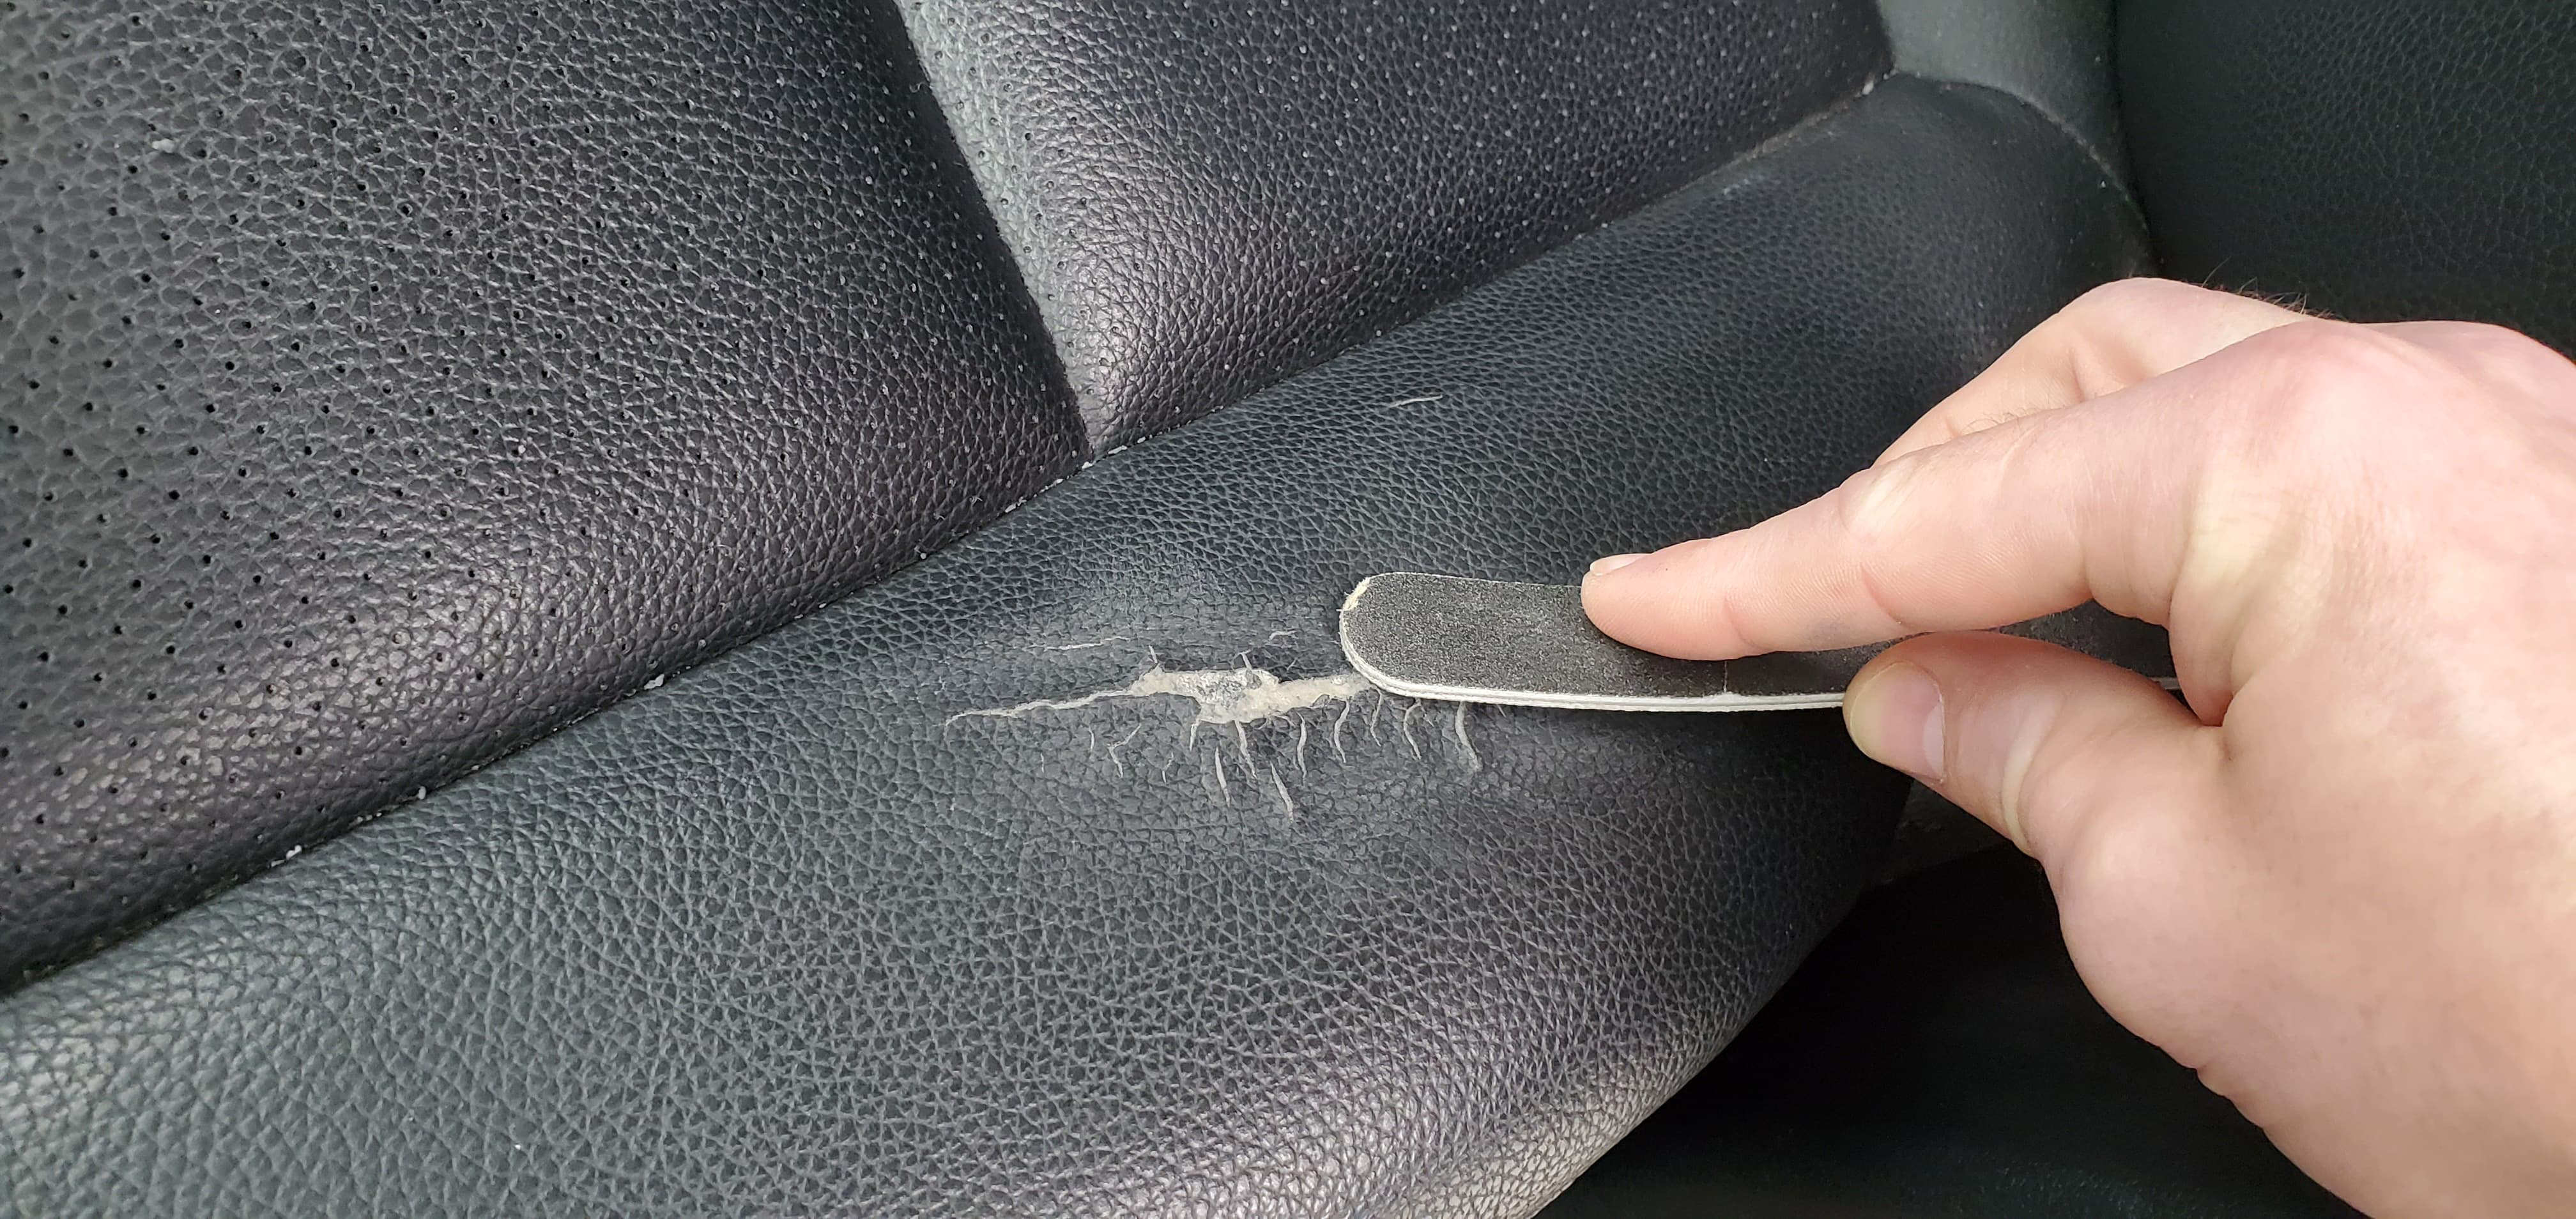 How To Repair A Leather Car Seat - How To Repair Tear In Leather Seat